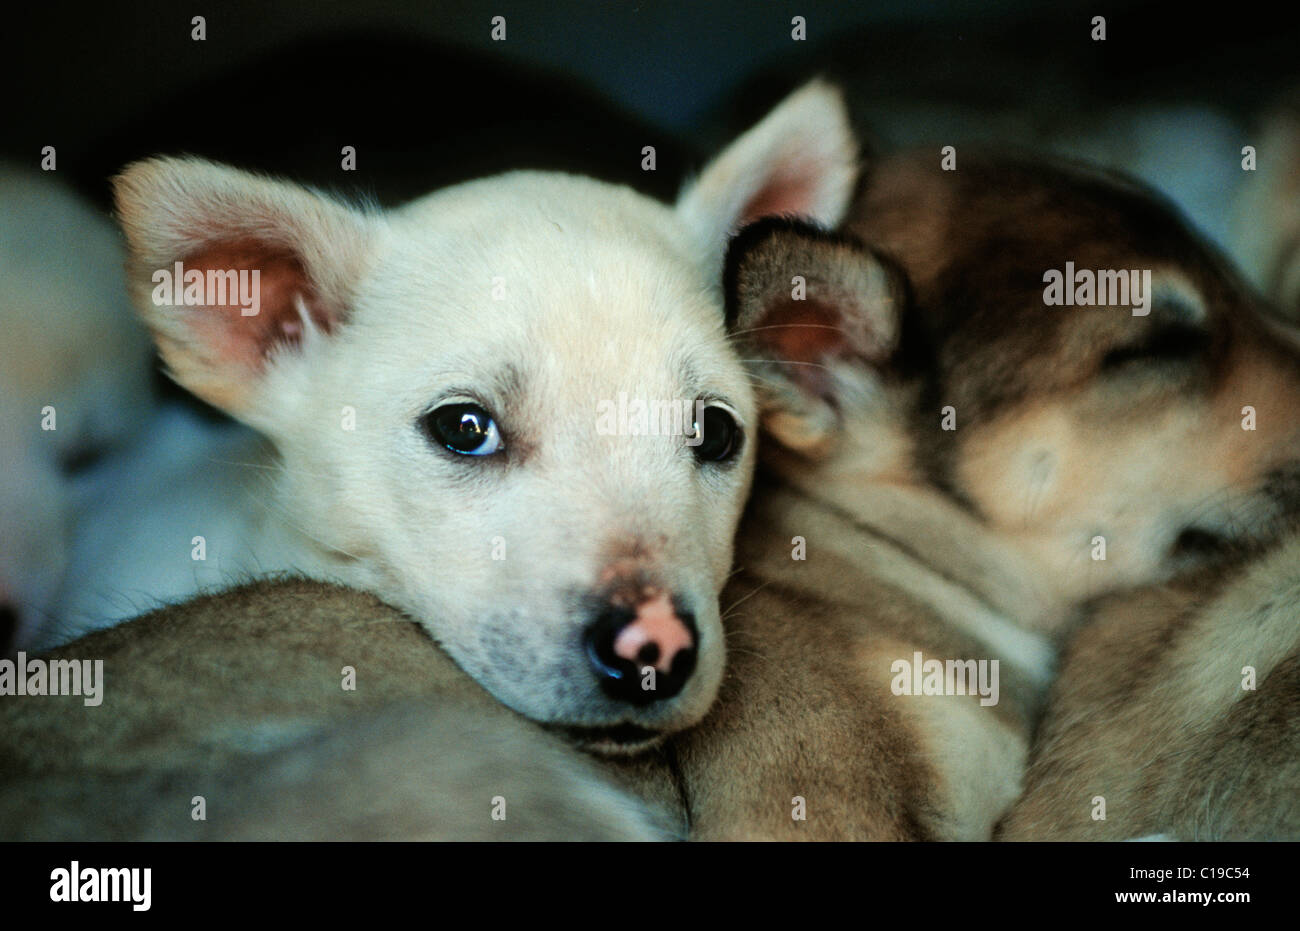 Sled dog puppy, young sled dogs huddling together Stock Photo